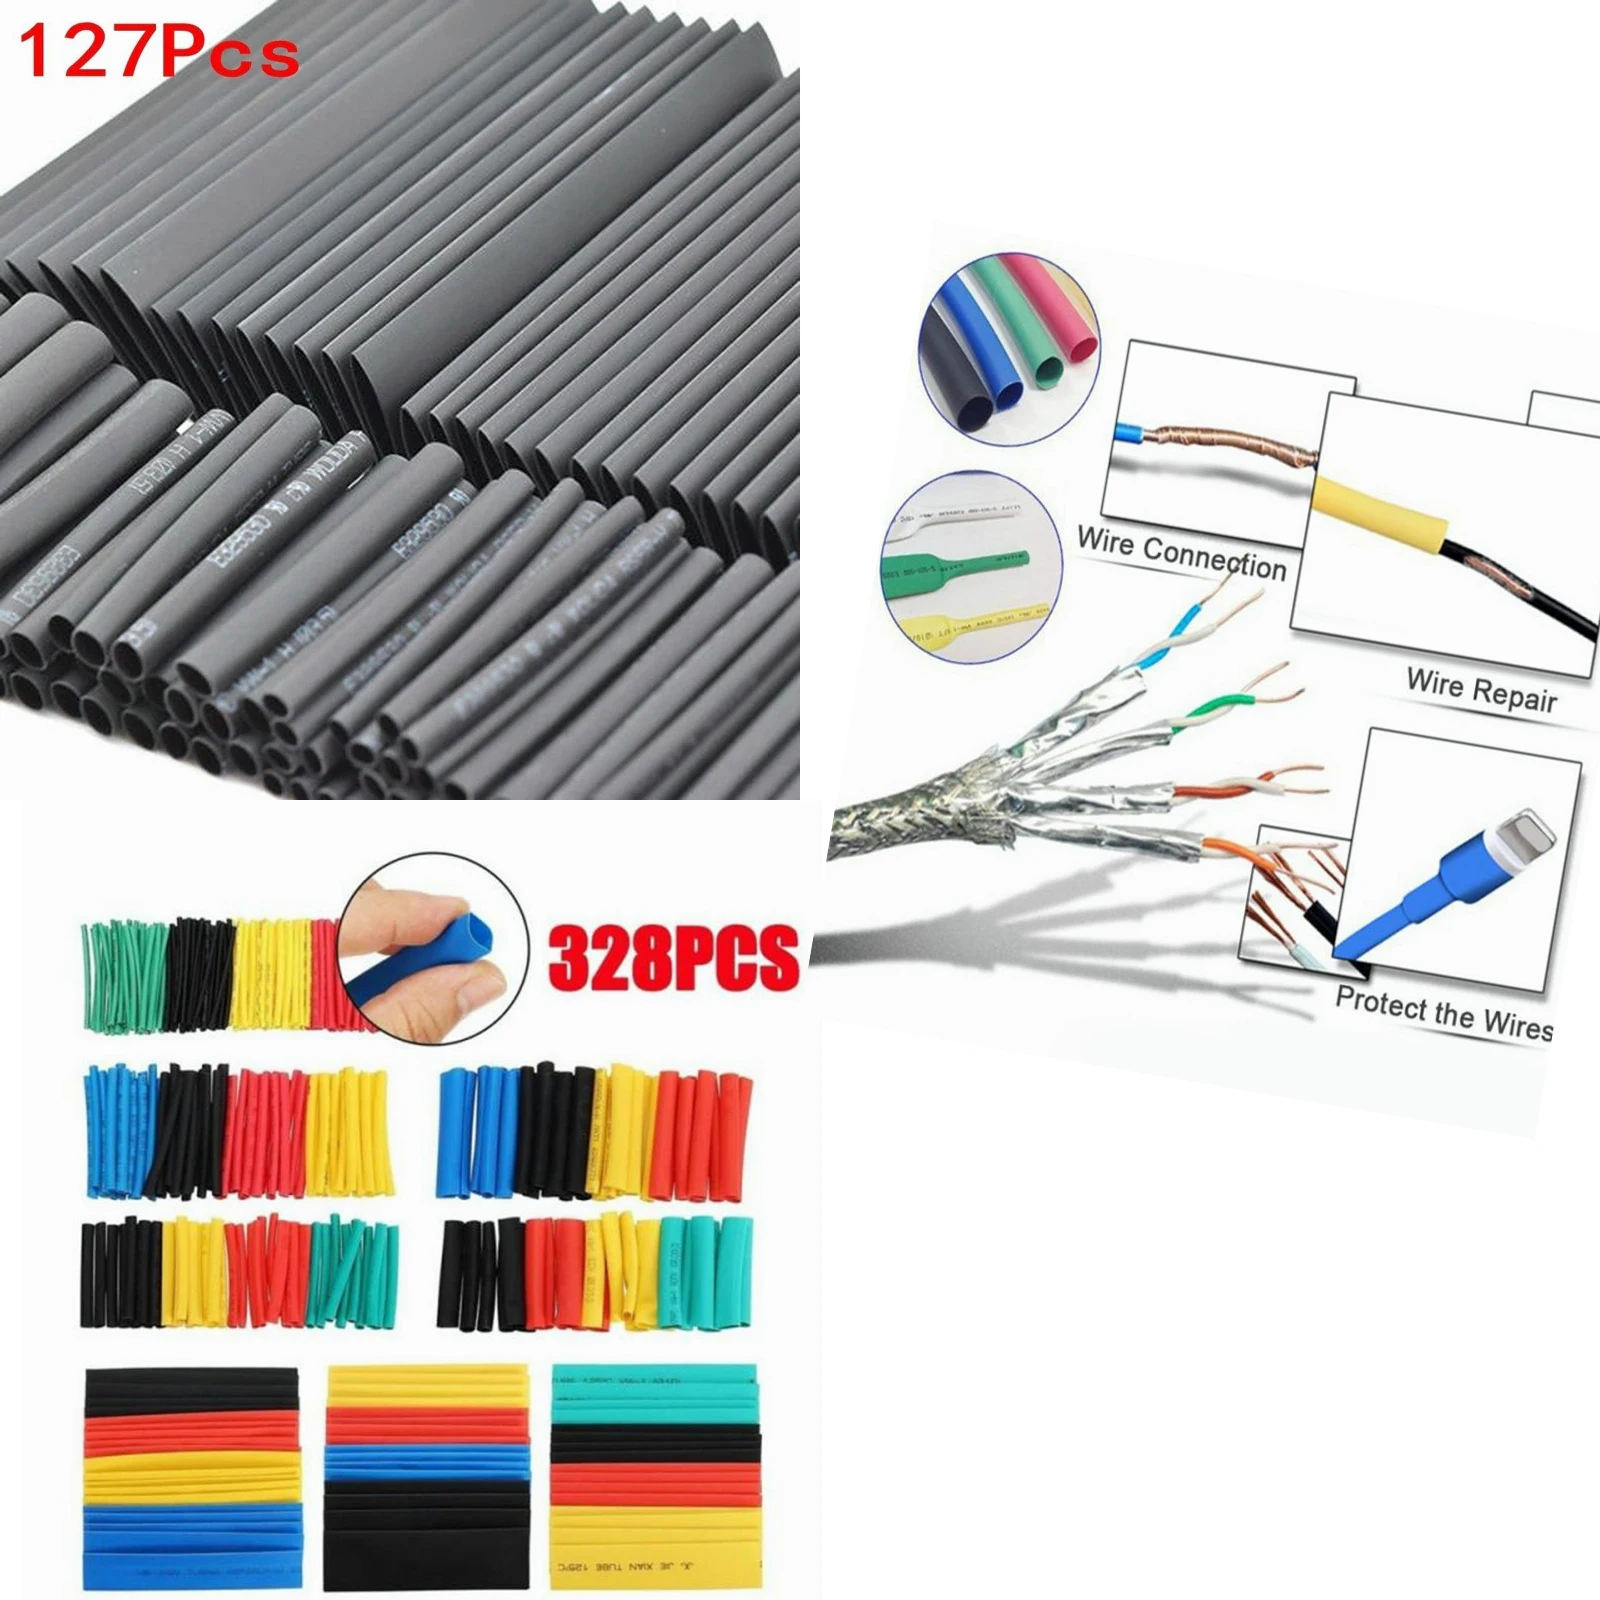 

328/127pcs Heat Shrink Tube Wires Shrinking Wrap Tubing Wire Connect Cover Protection Cable Electric Cable Waterproof Shrinkable